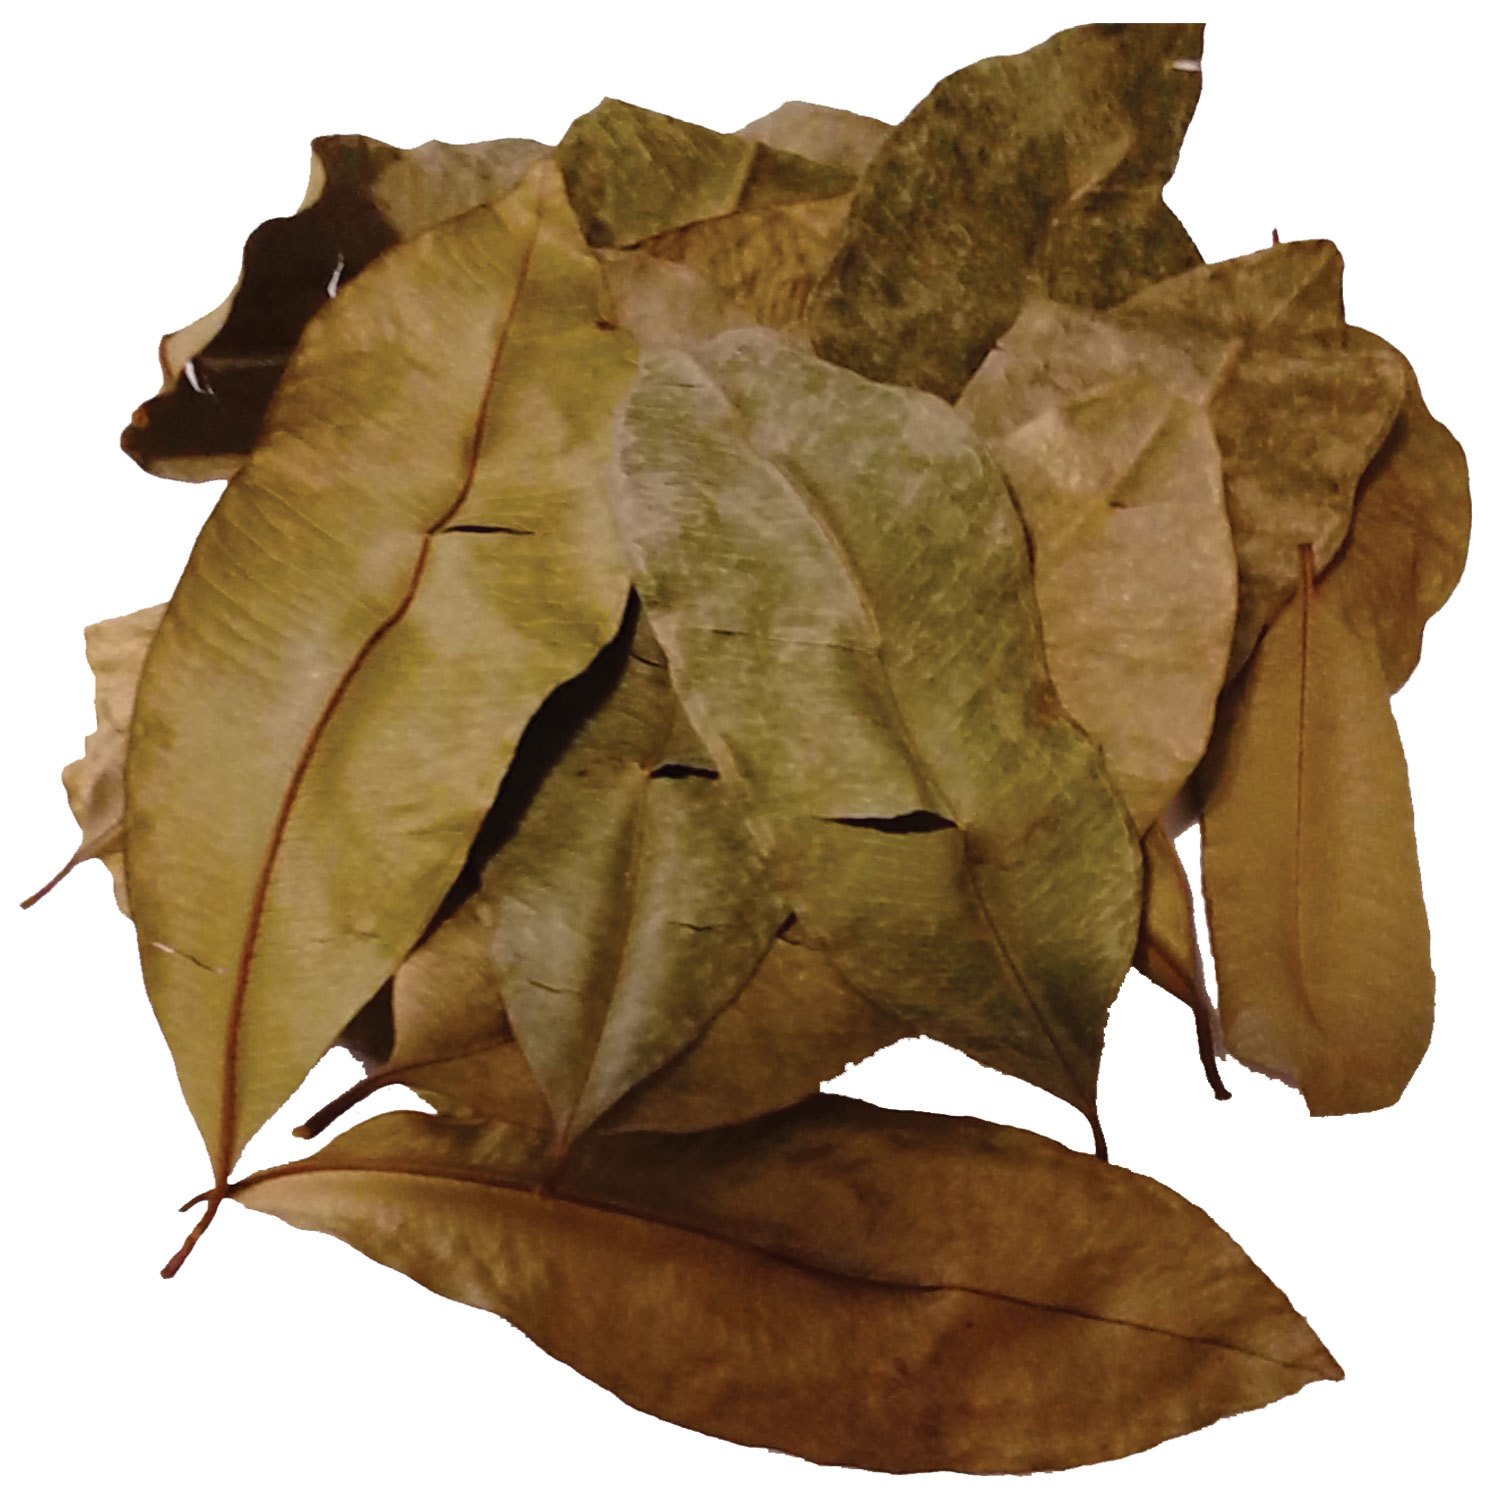 Dry leaves photo